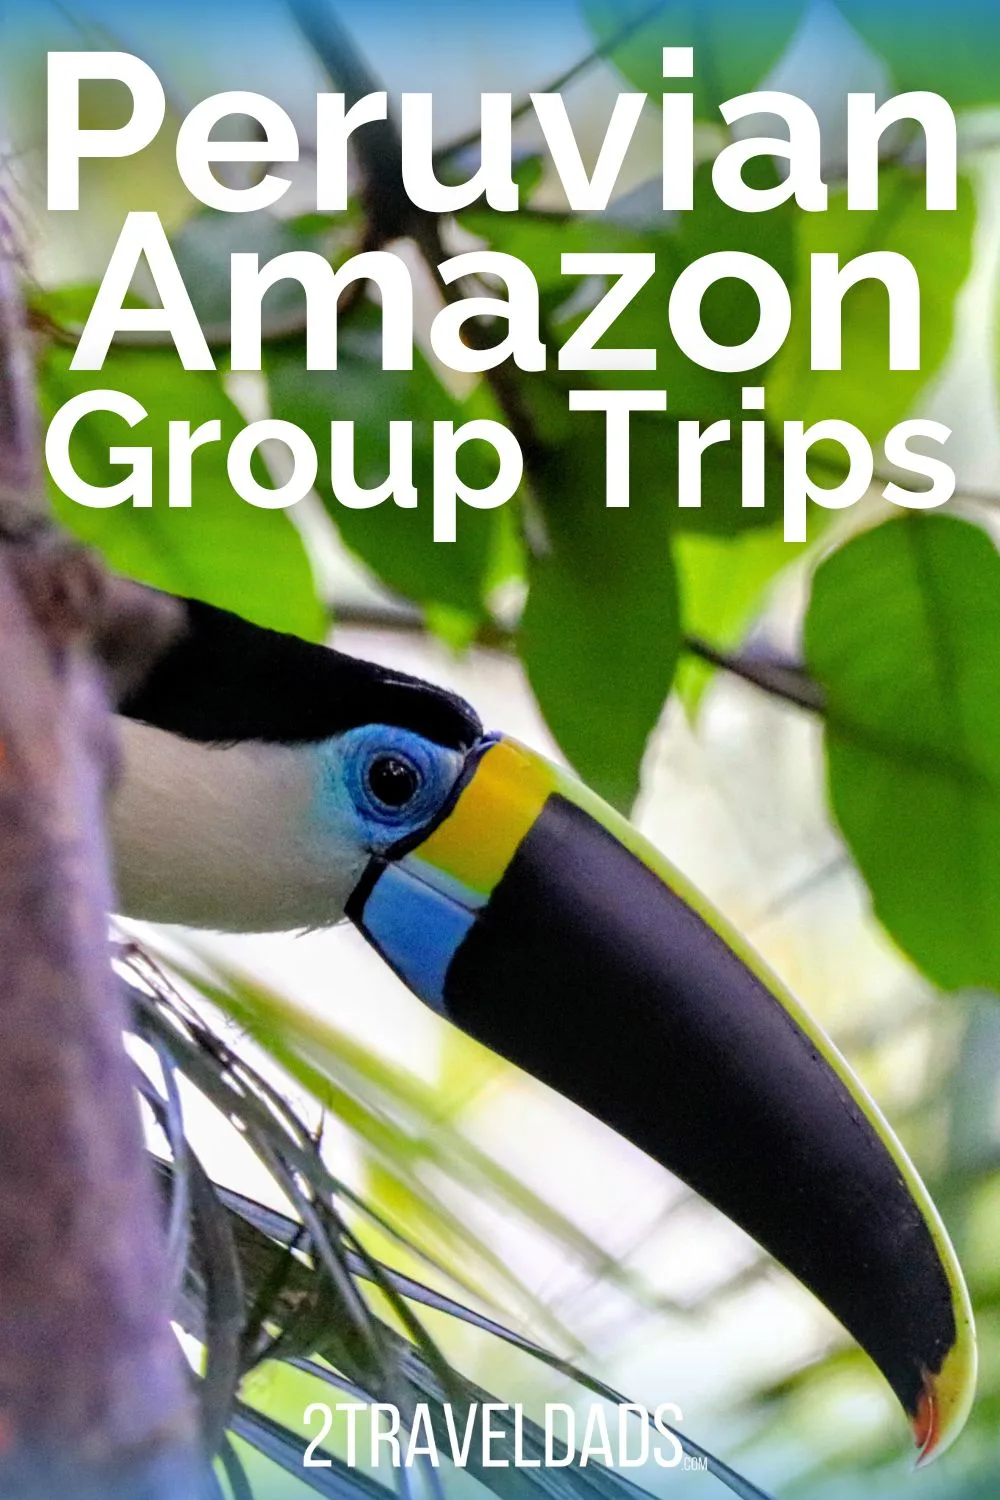 Looking for an incredible Peruvian Amazon group trip? Join us for a fun affordable adventure that doesn't skimp on the elements of bespoke travel to the Amazon.